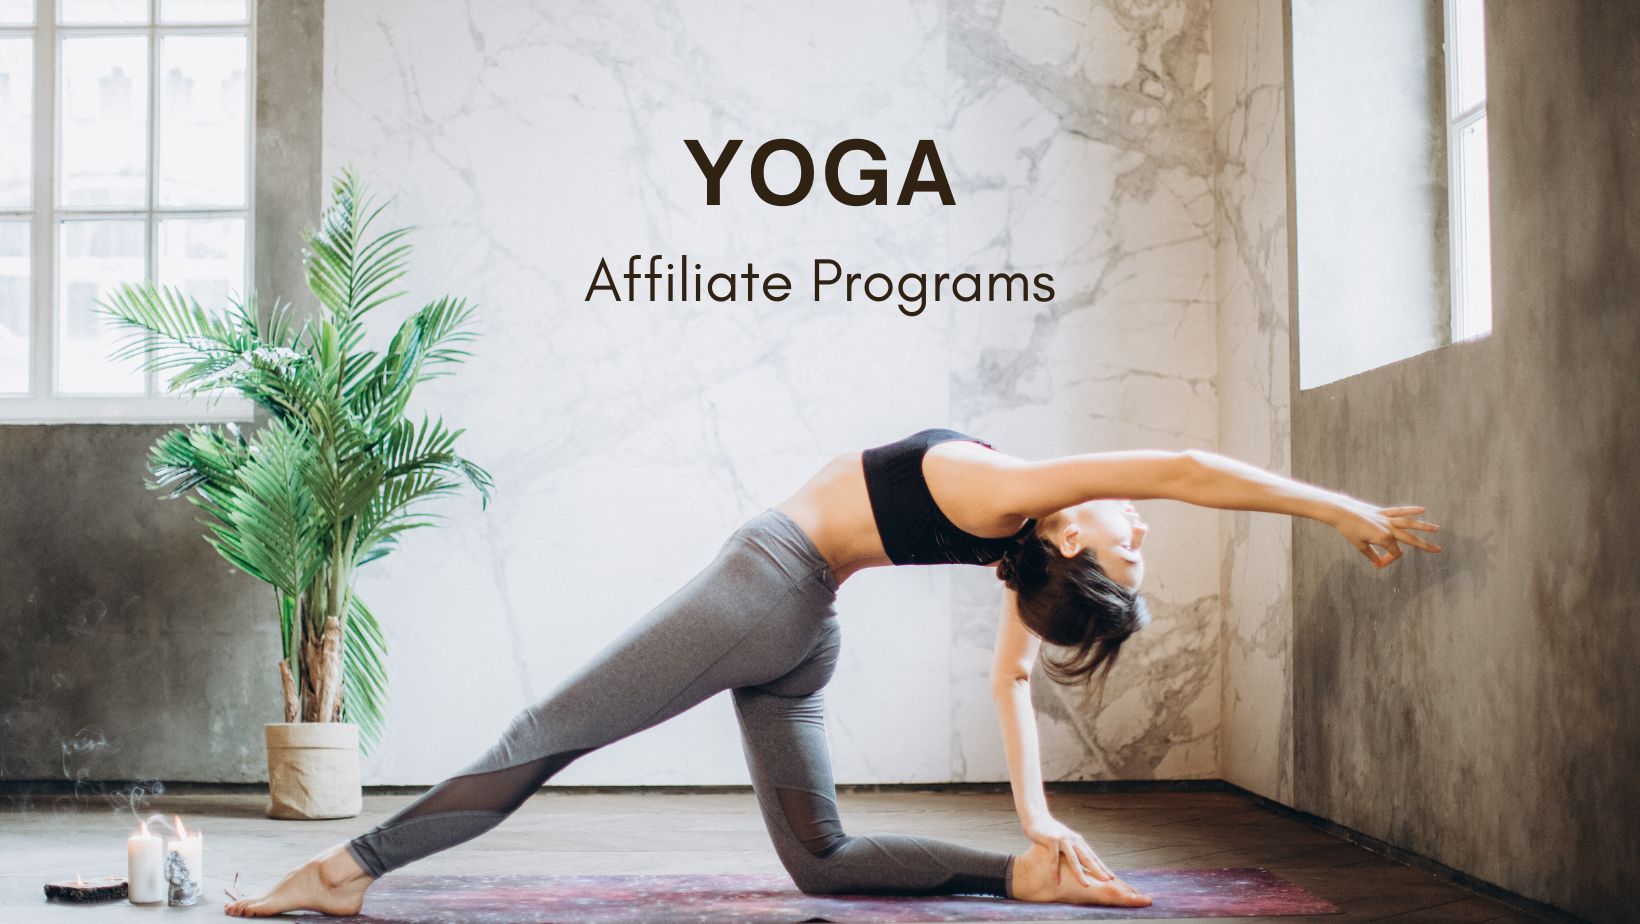 Here are our top picks for the best yoga affiliate programs out there. Read on to learn more!